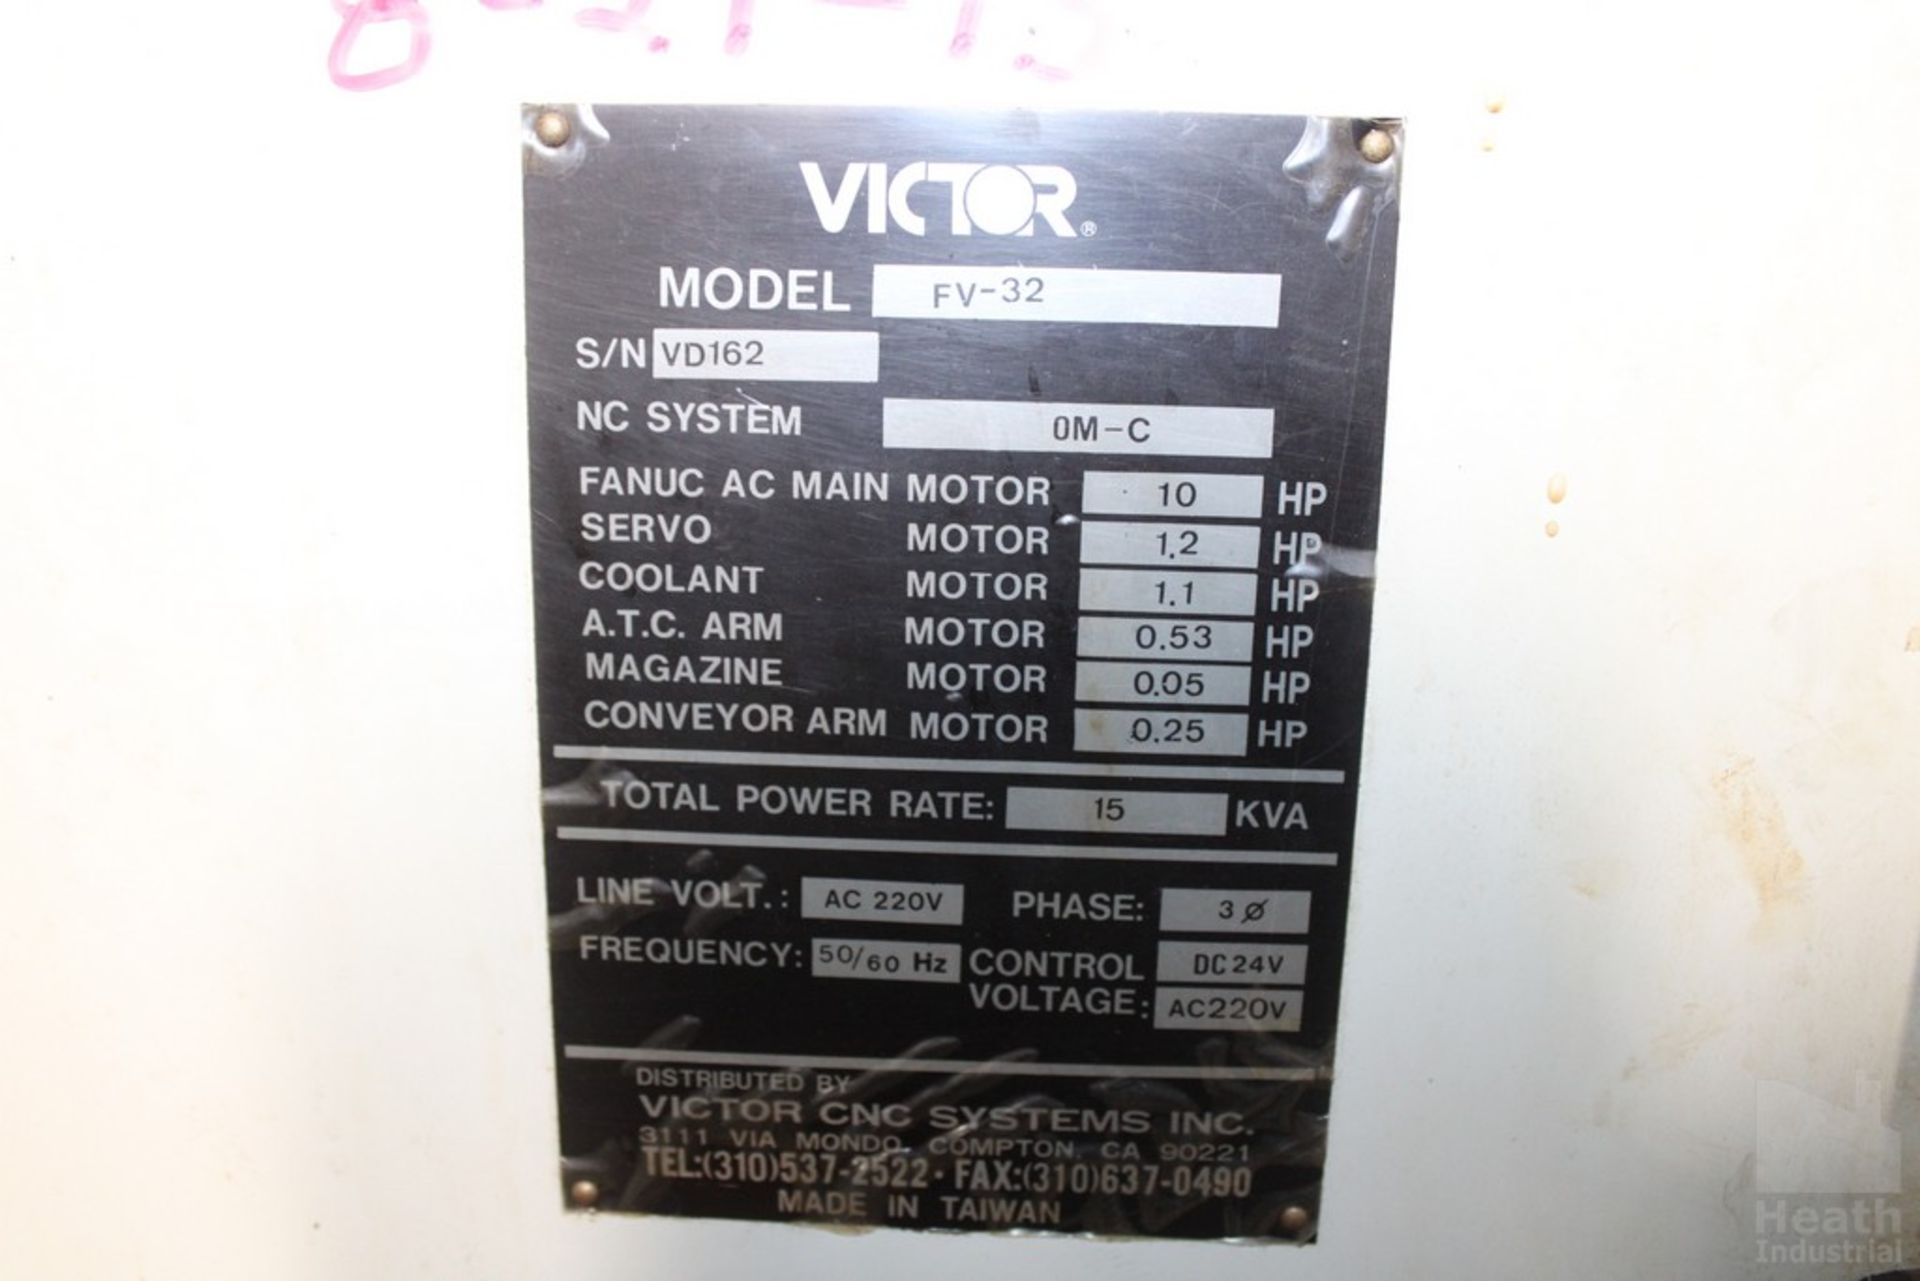 VICTOR MODEL FV-32 CNC VERTICAL MACHINING CENTER, S/N VD162, 31.5" X-AXIS TRAVEL, 17.7" Y-AXIS - Image 8 of 8